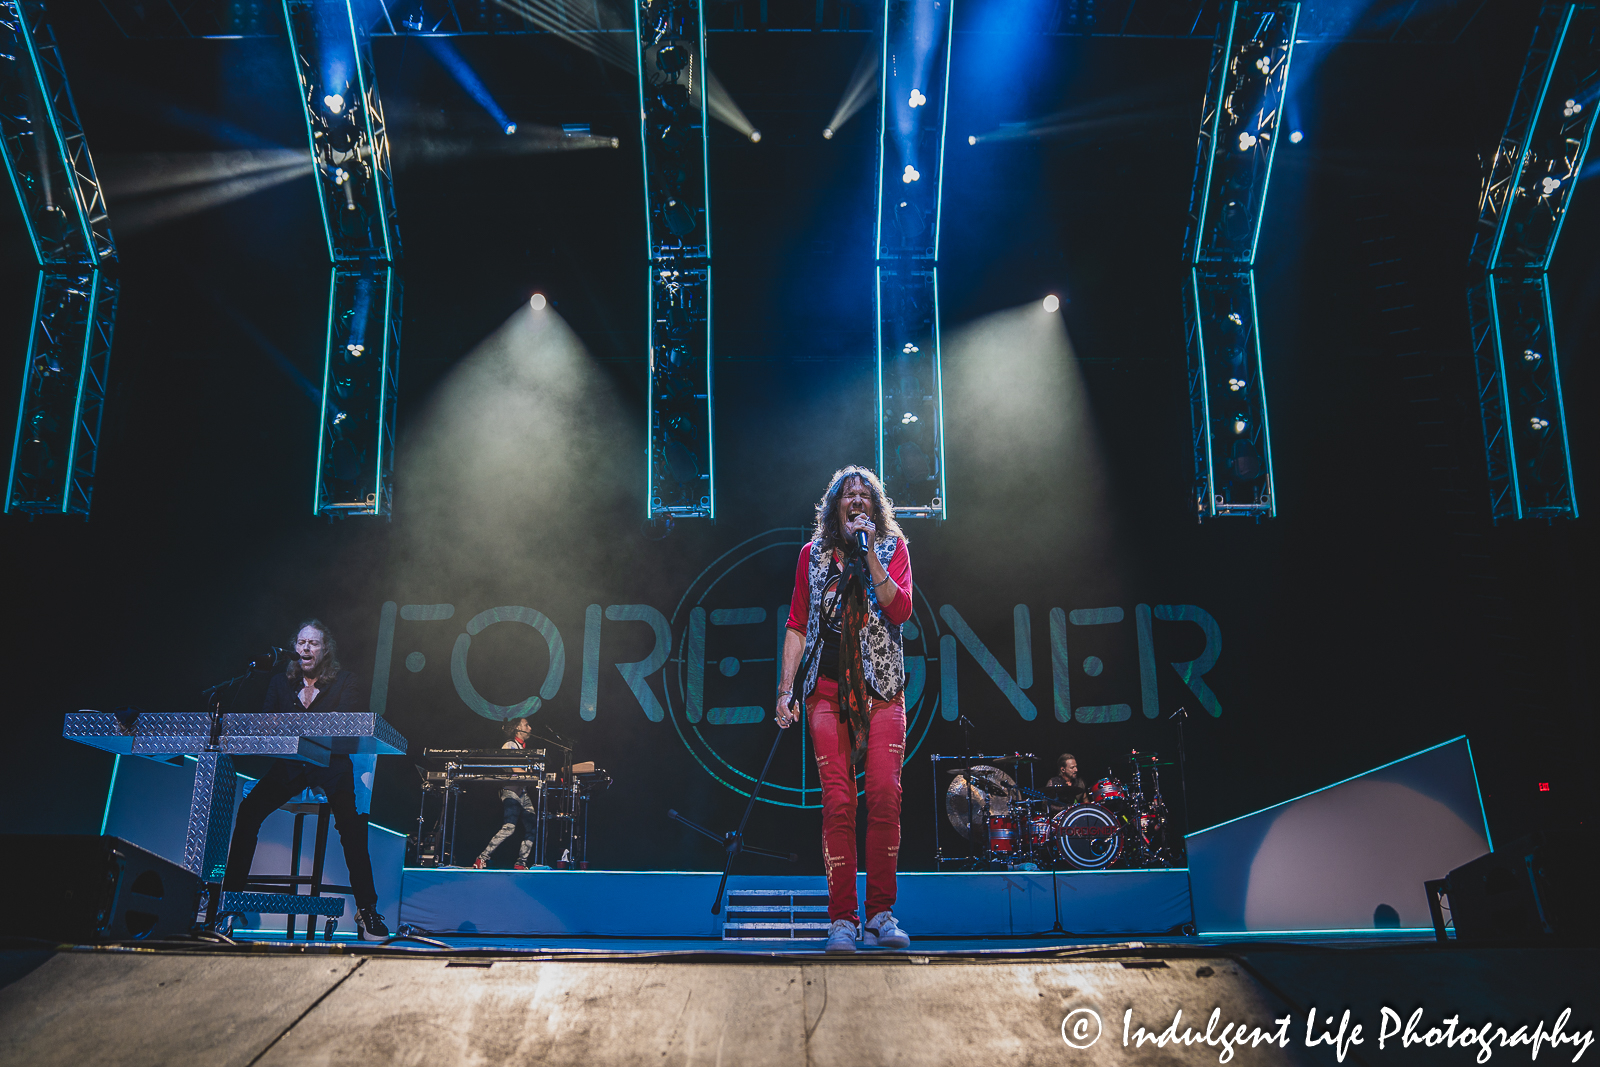 Kansas City live concert performance at Starlight Theatre featuring Foreigner on "The Historic Farewell Tour" at Starlight Theatre in Kansas City, MO on July 18, 2023.